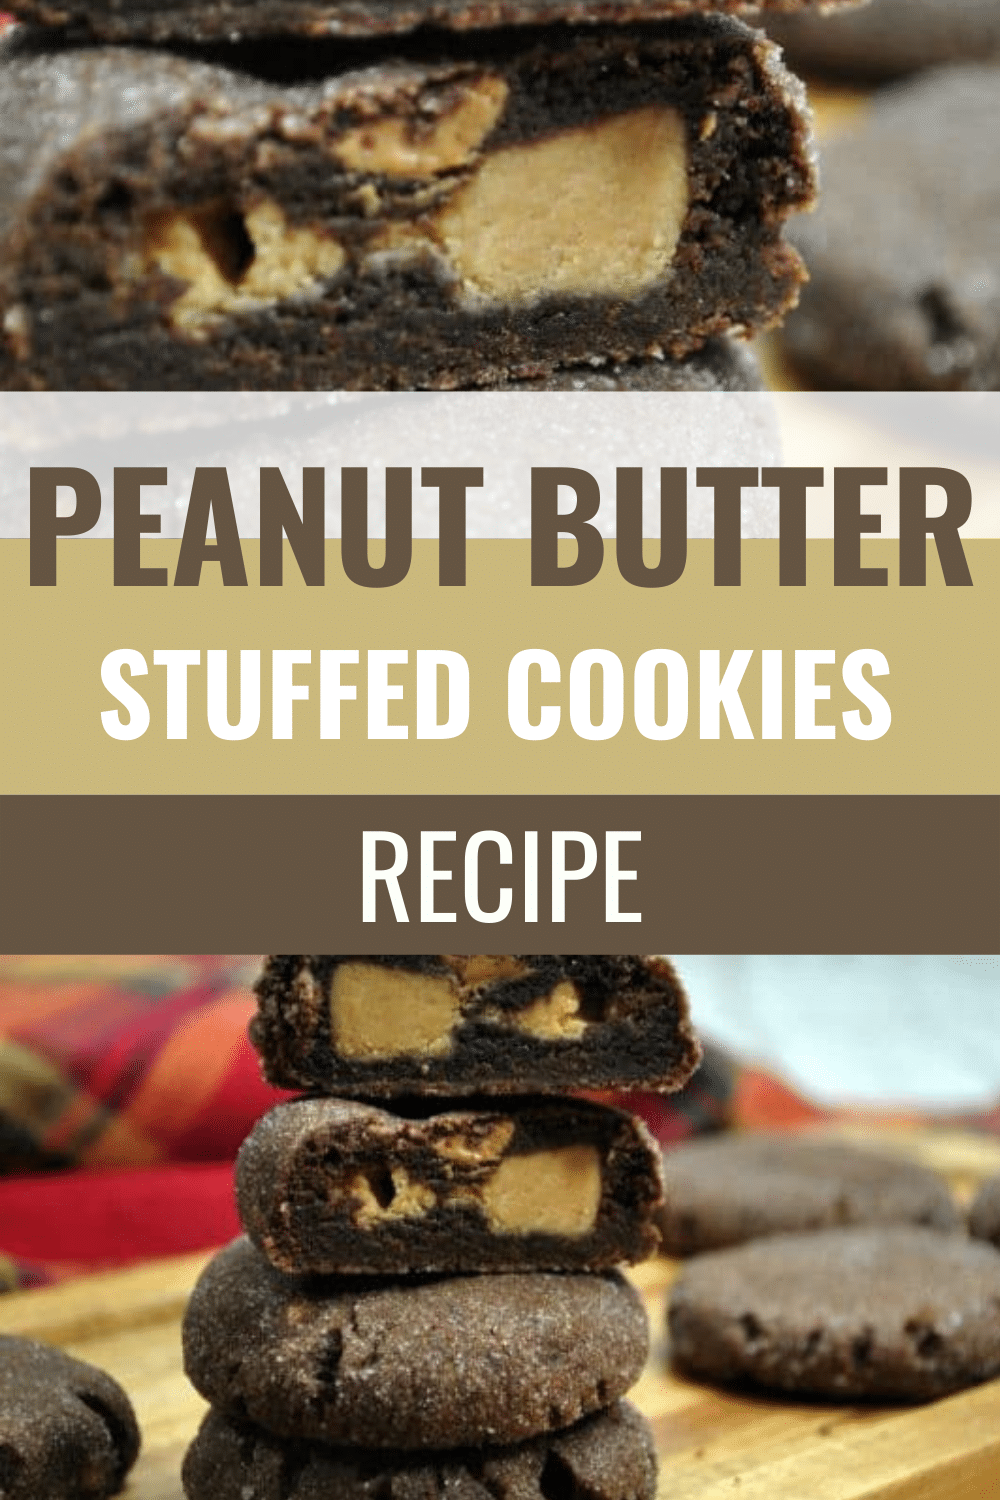 This homemade peanut butter stuffed cookie recipe will become a family favorite. Full of creamy peanut butter and chocolate these cookies are delicious. #peanutbutter #cookies #cookierecipe via @wondermomwannab